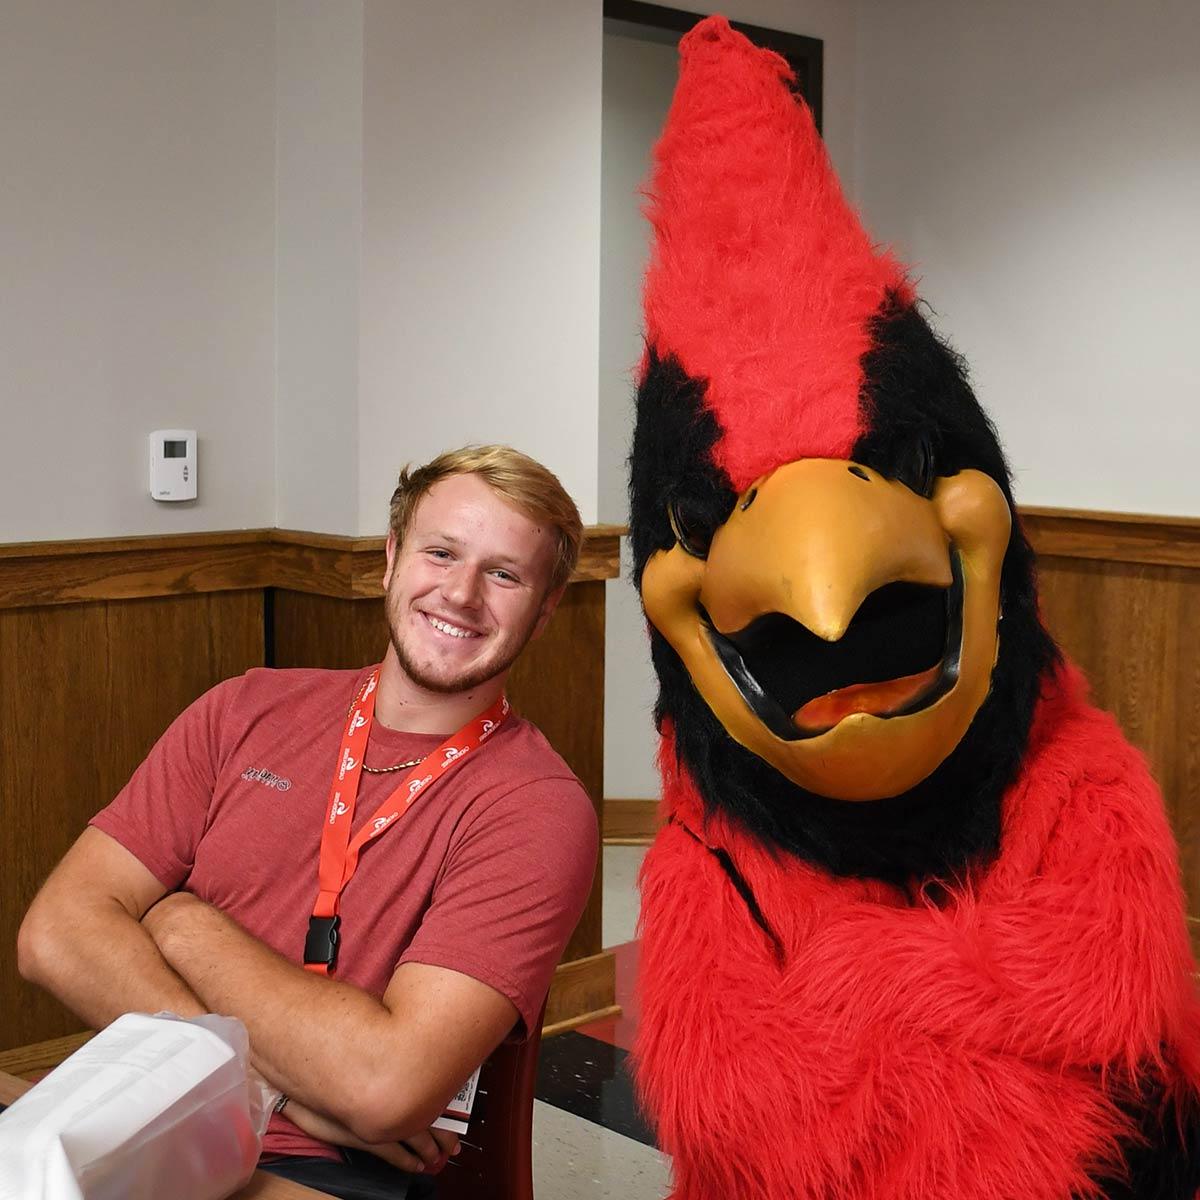 Cardinal mascot Swoop with a student at orientation